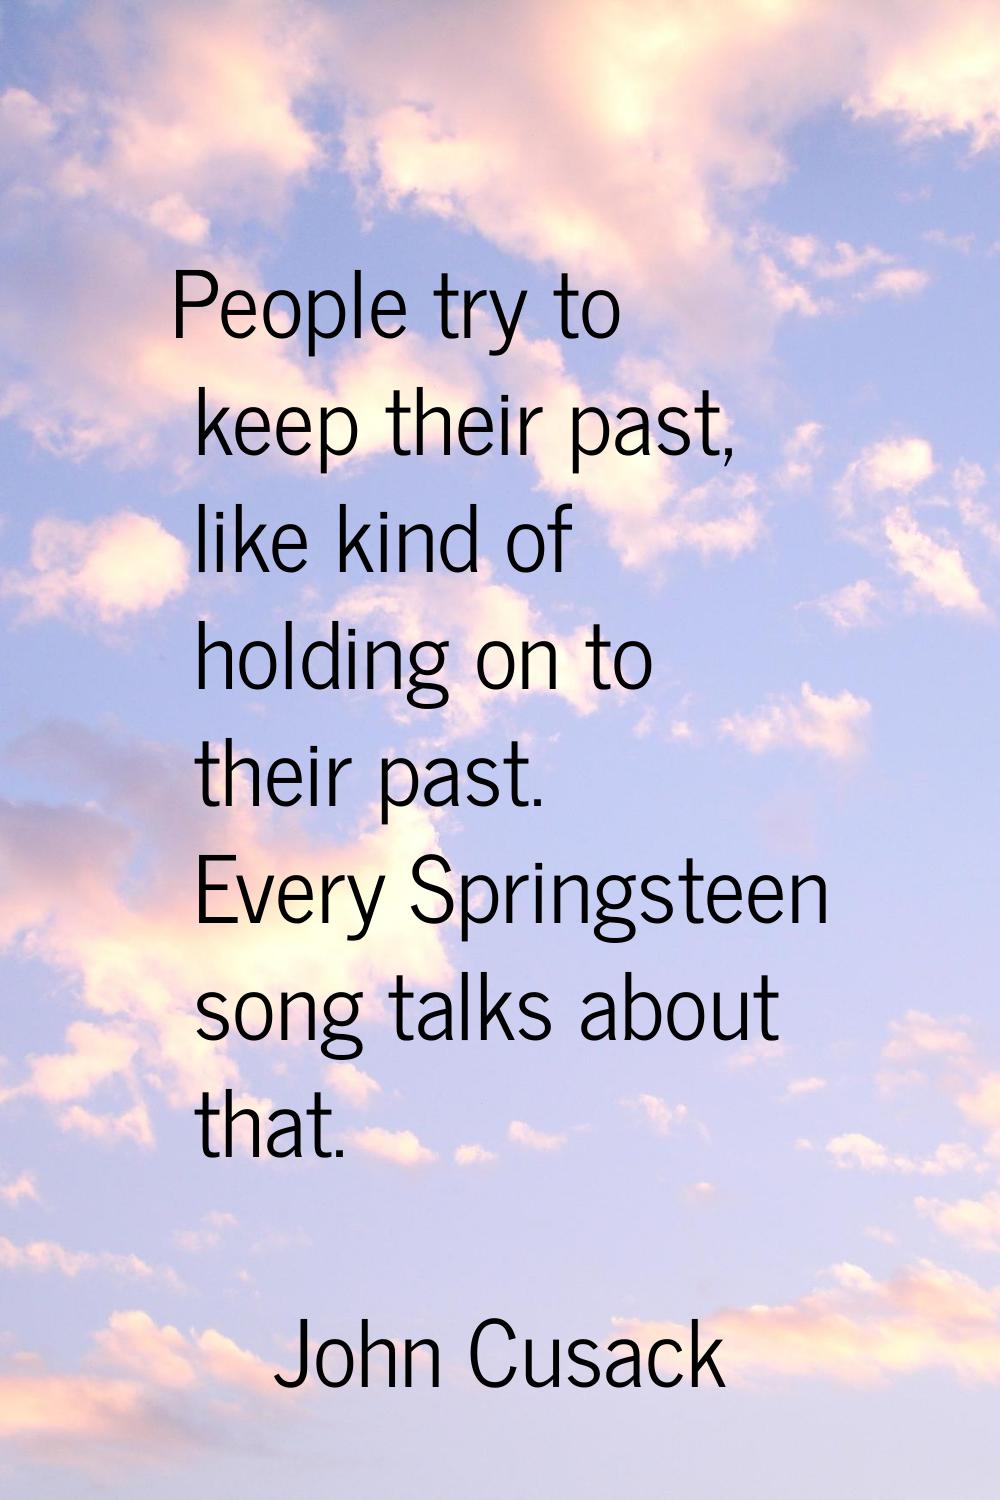 People try to keep their past, like kind of holding on to their past. Every Springsteen song talks 